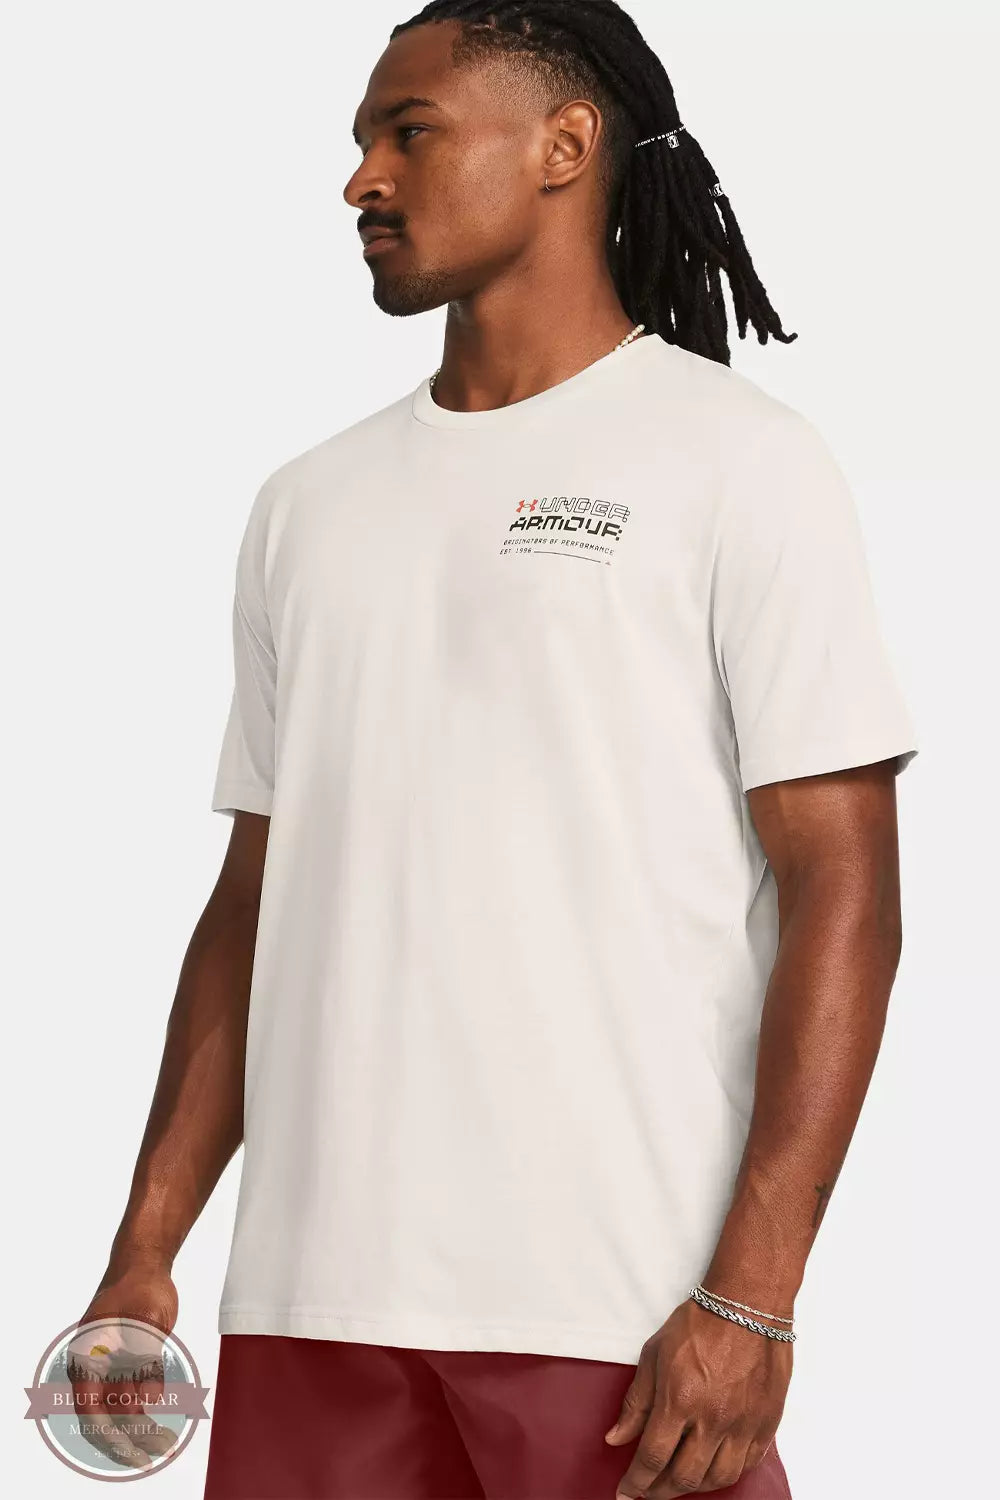 Under Armour 1382906-110 Reaching Peak Short Sleeve T-Shirt in Summit White Front View